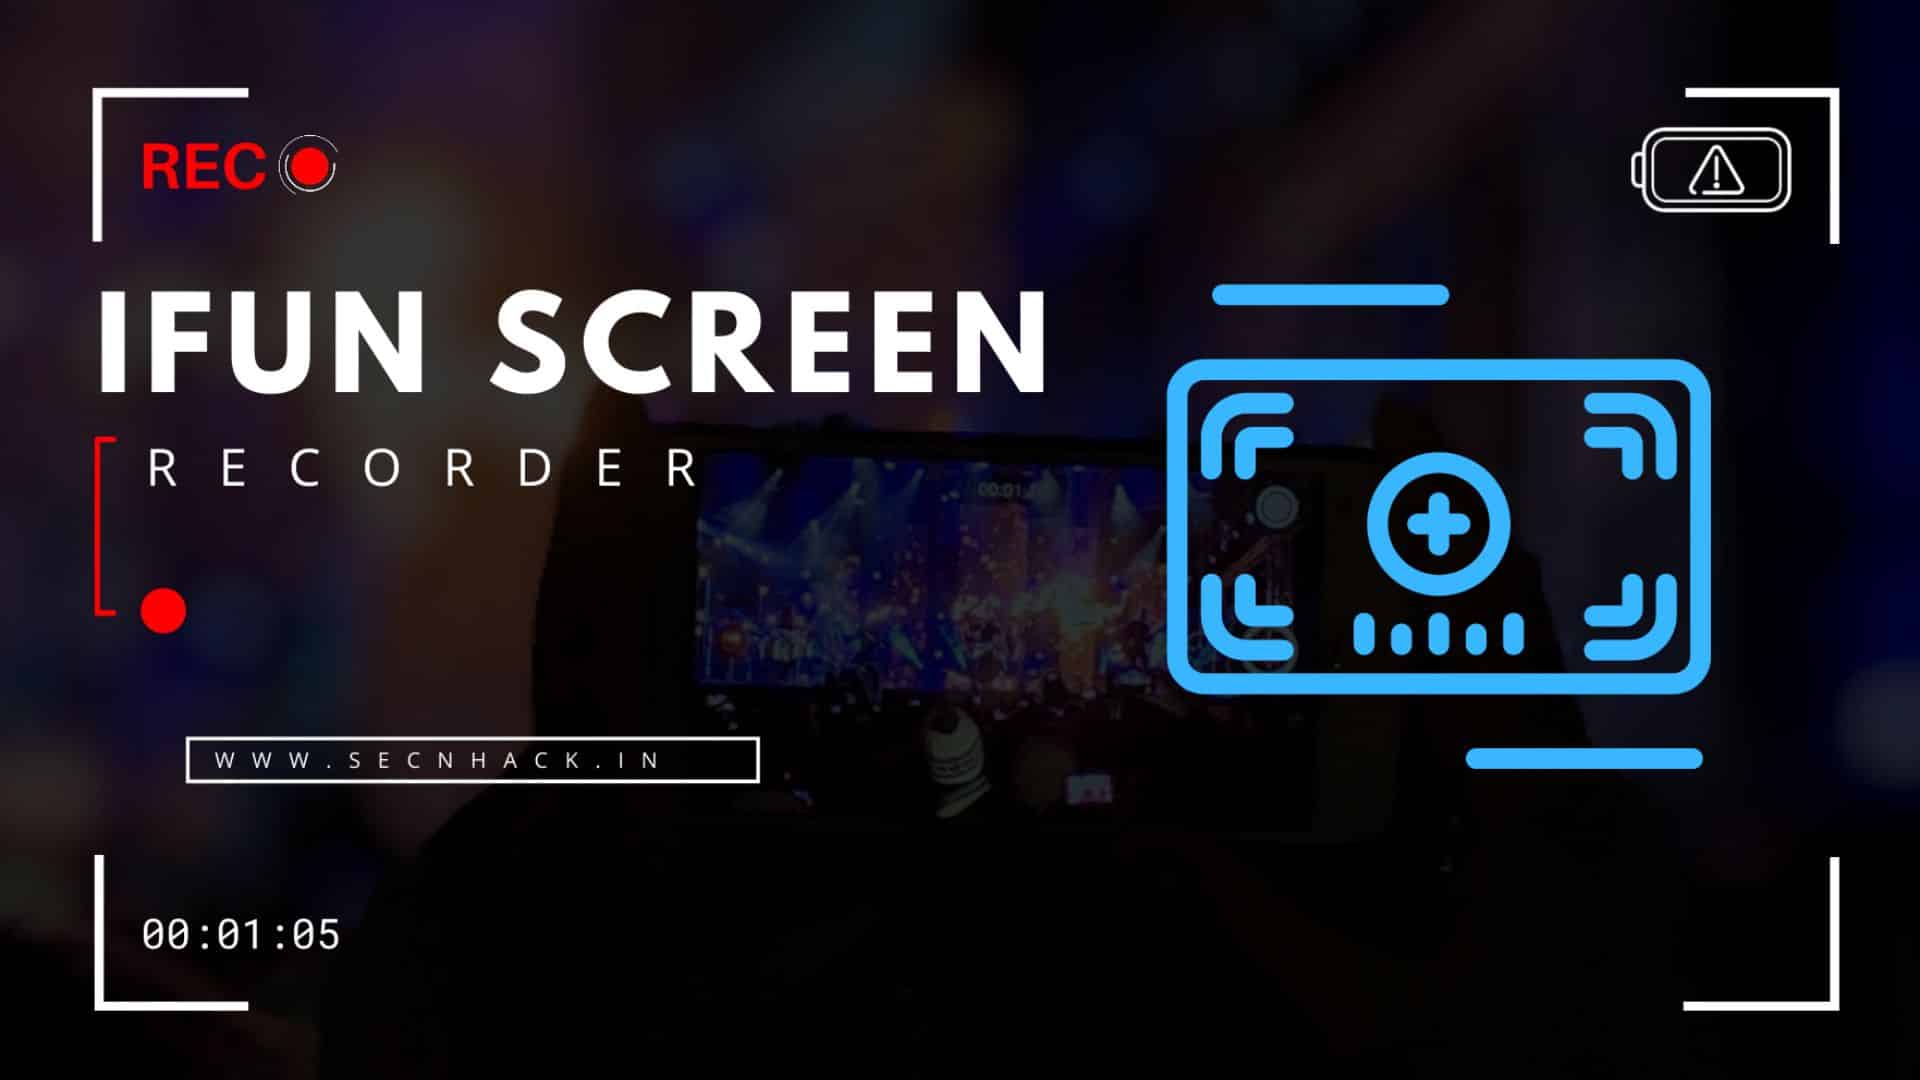 iFun Screen Recorder Review, Pricing, and better Alternatives